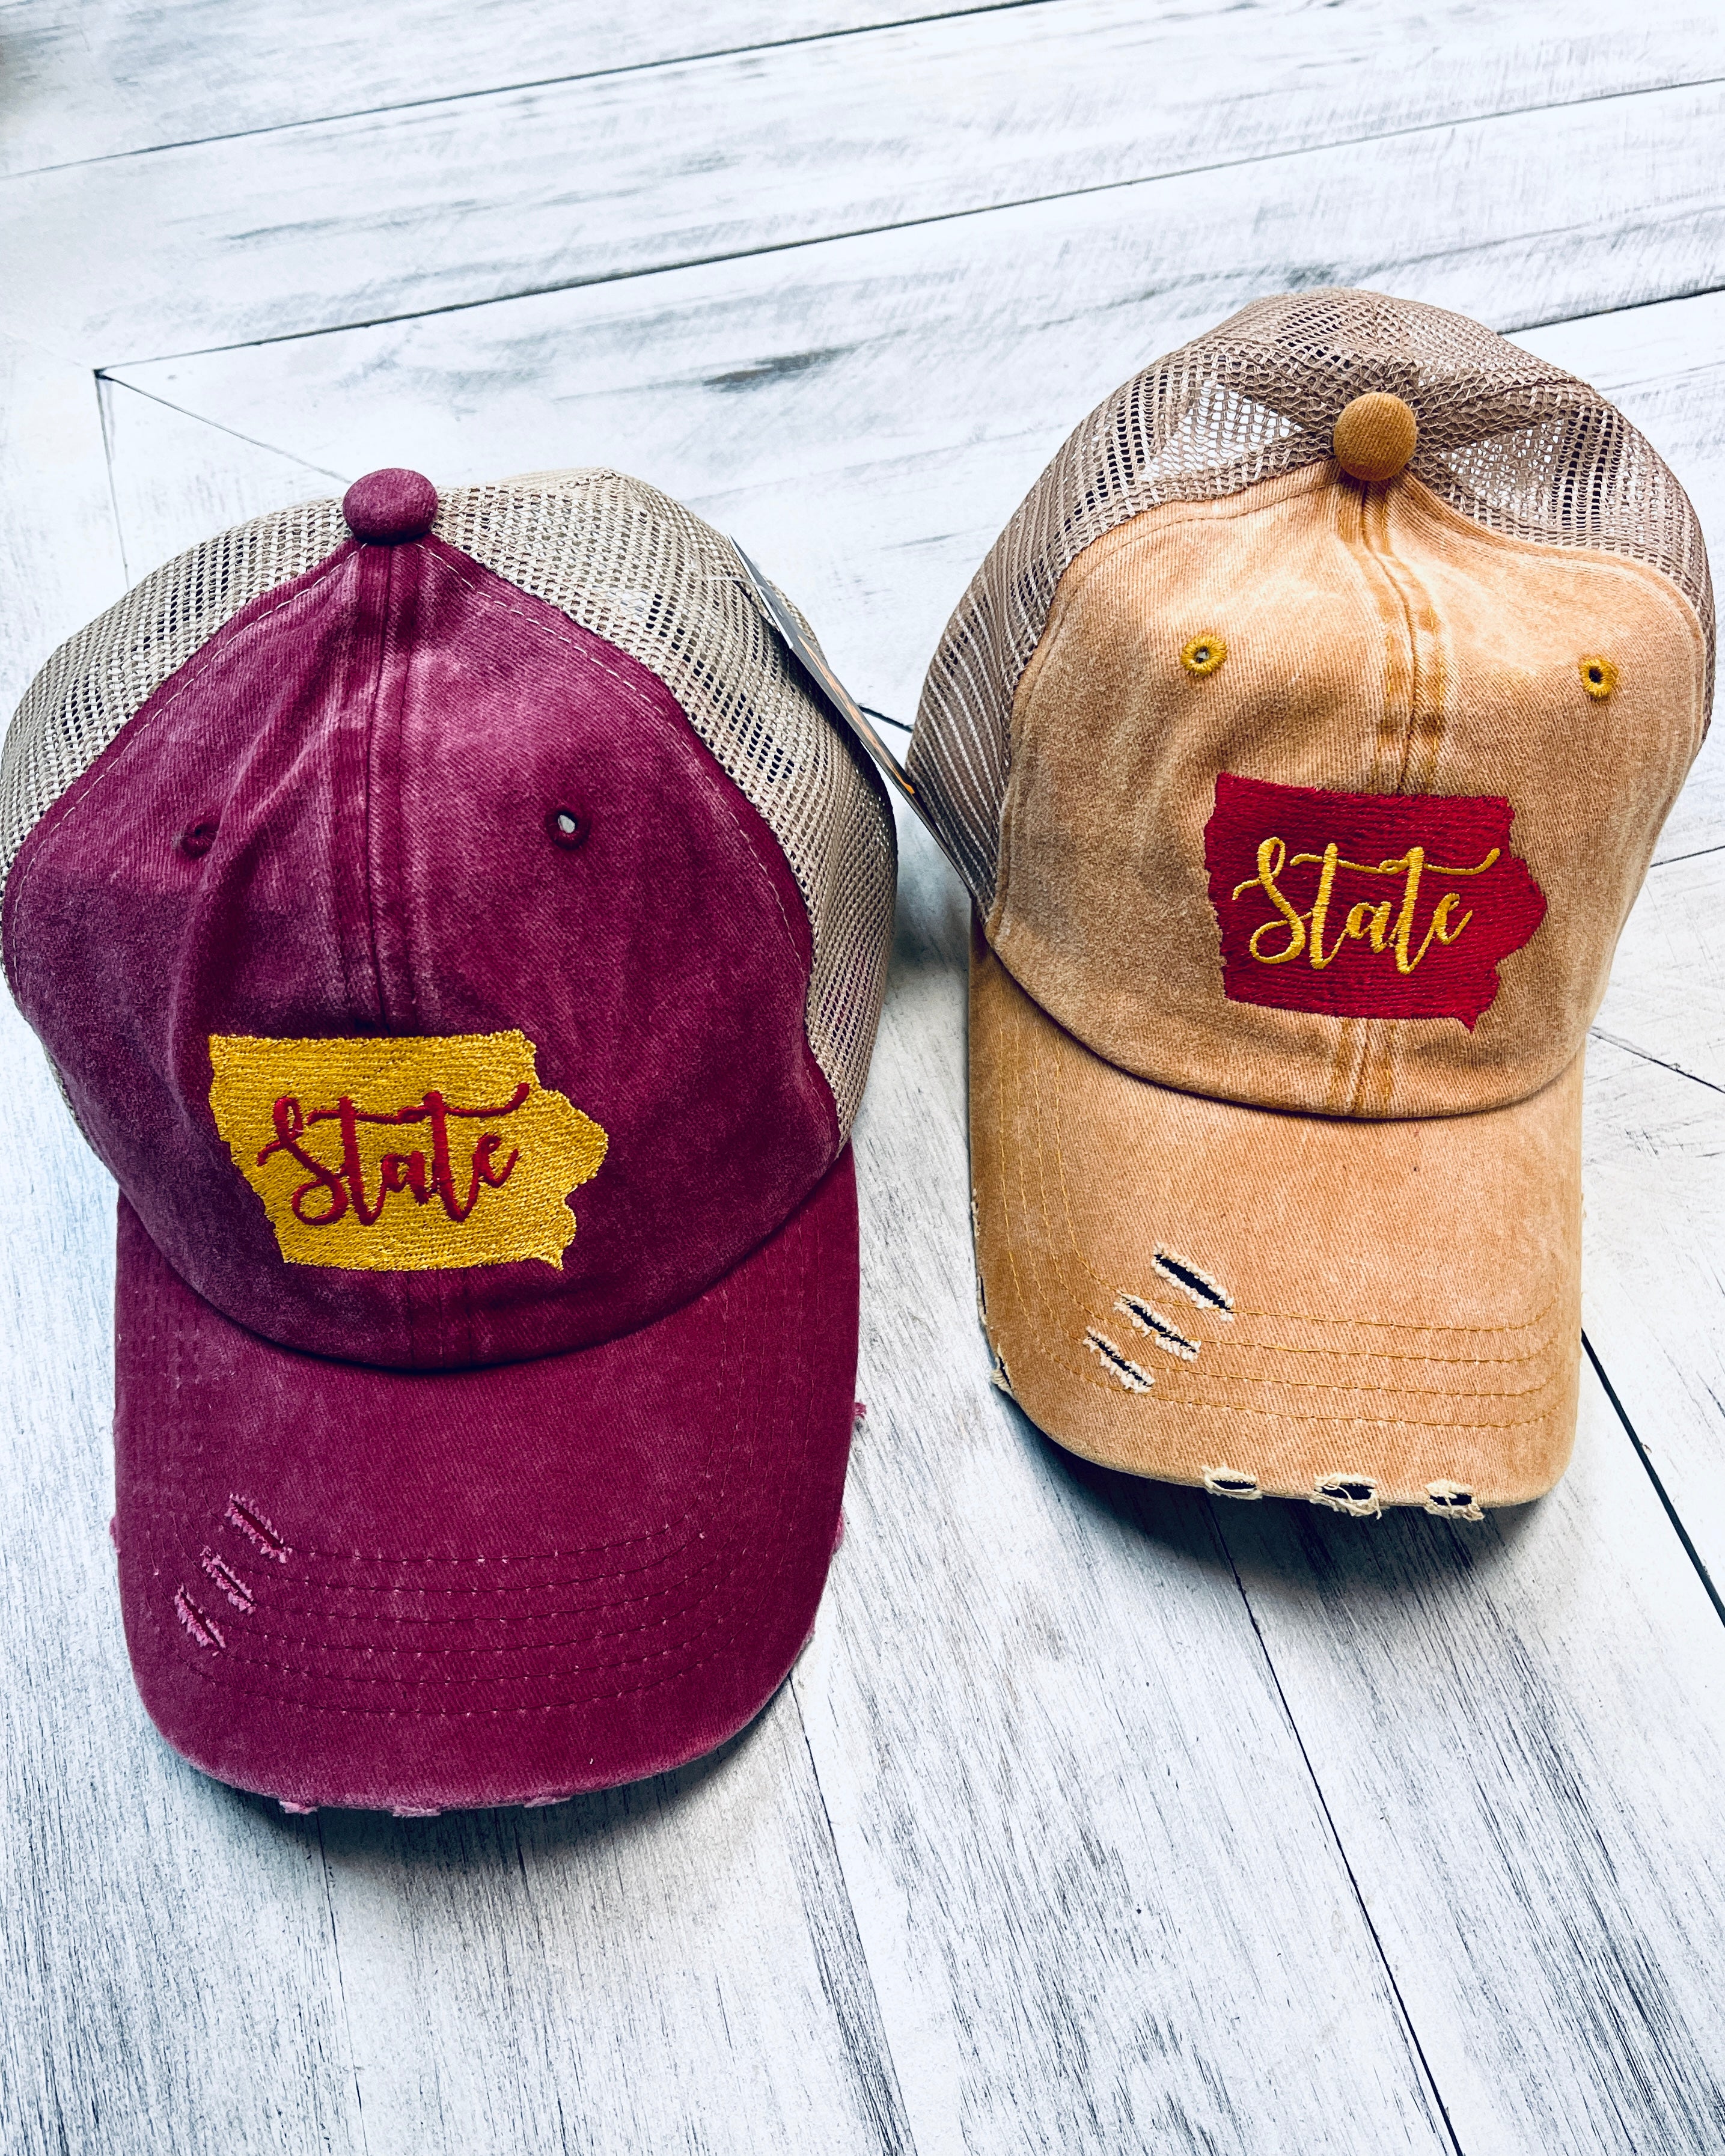 Red & Gold Iowa "STATE" Distressed Ball Cap